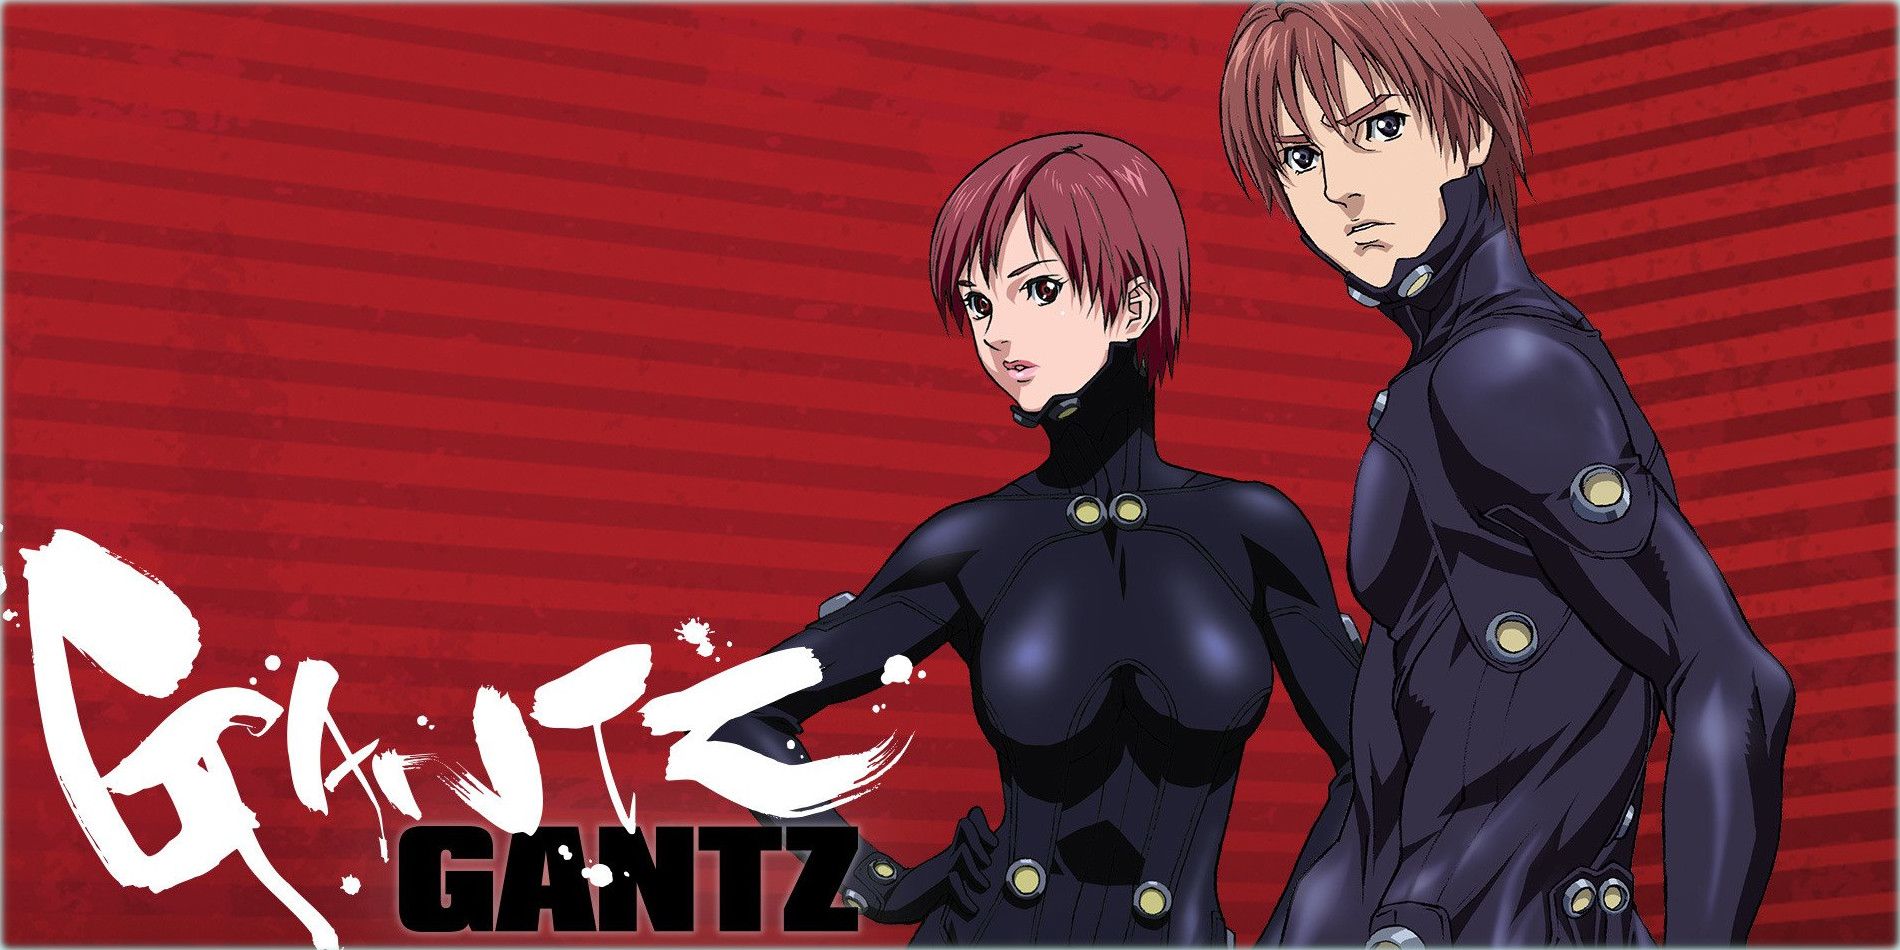 Gantz: The Problematic Depiction of Obsessive Love and Romance